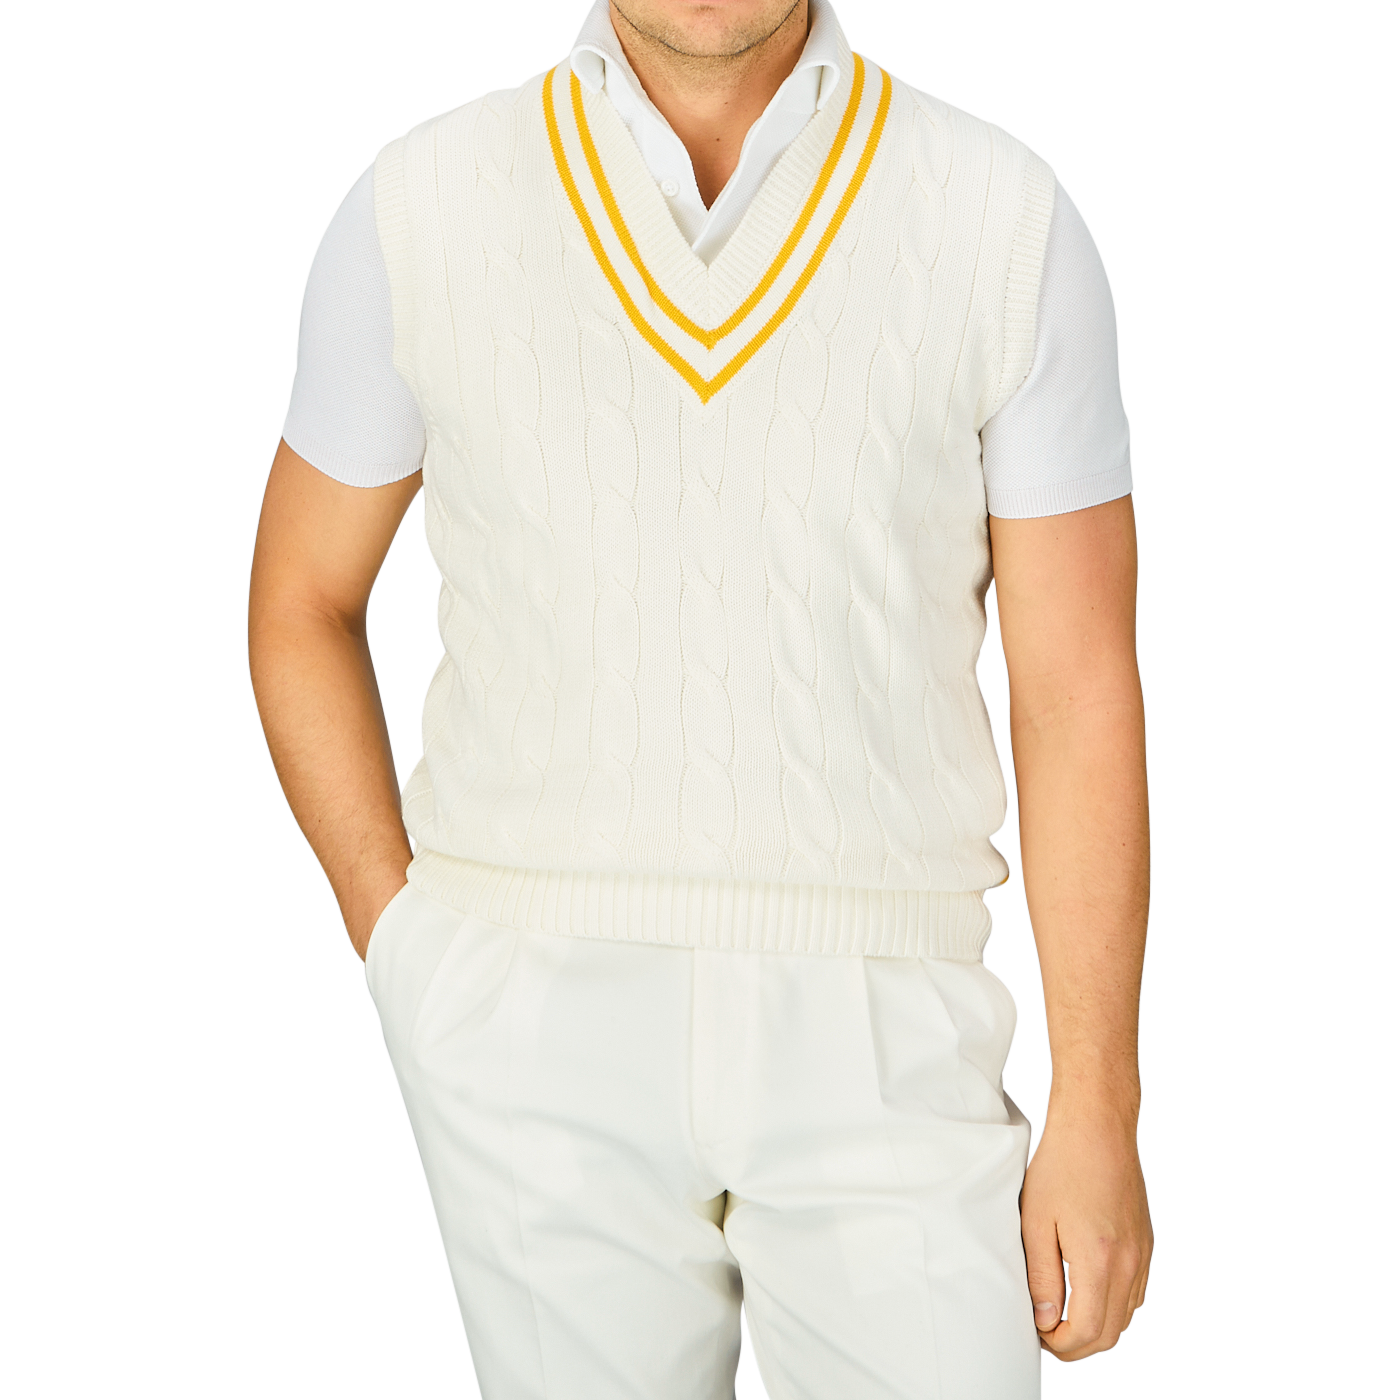 Man wearing an Alan Paine Off-White Yellow Striped Cotton Cricket Slipover with yellow and blue trim over a collared shirt, and white pants.